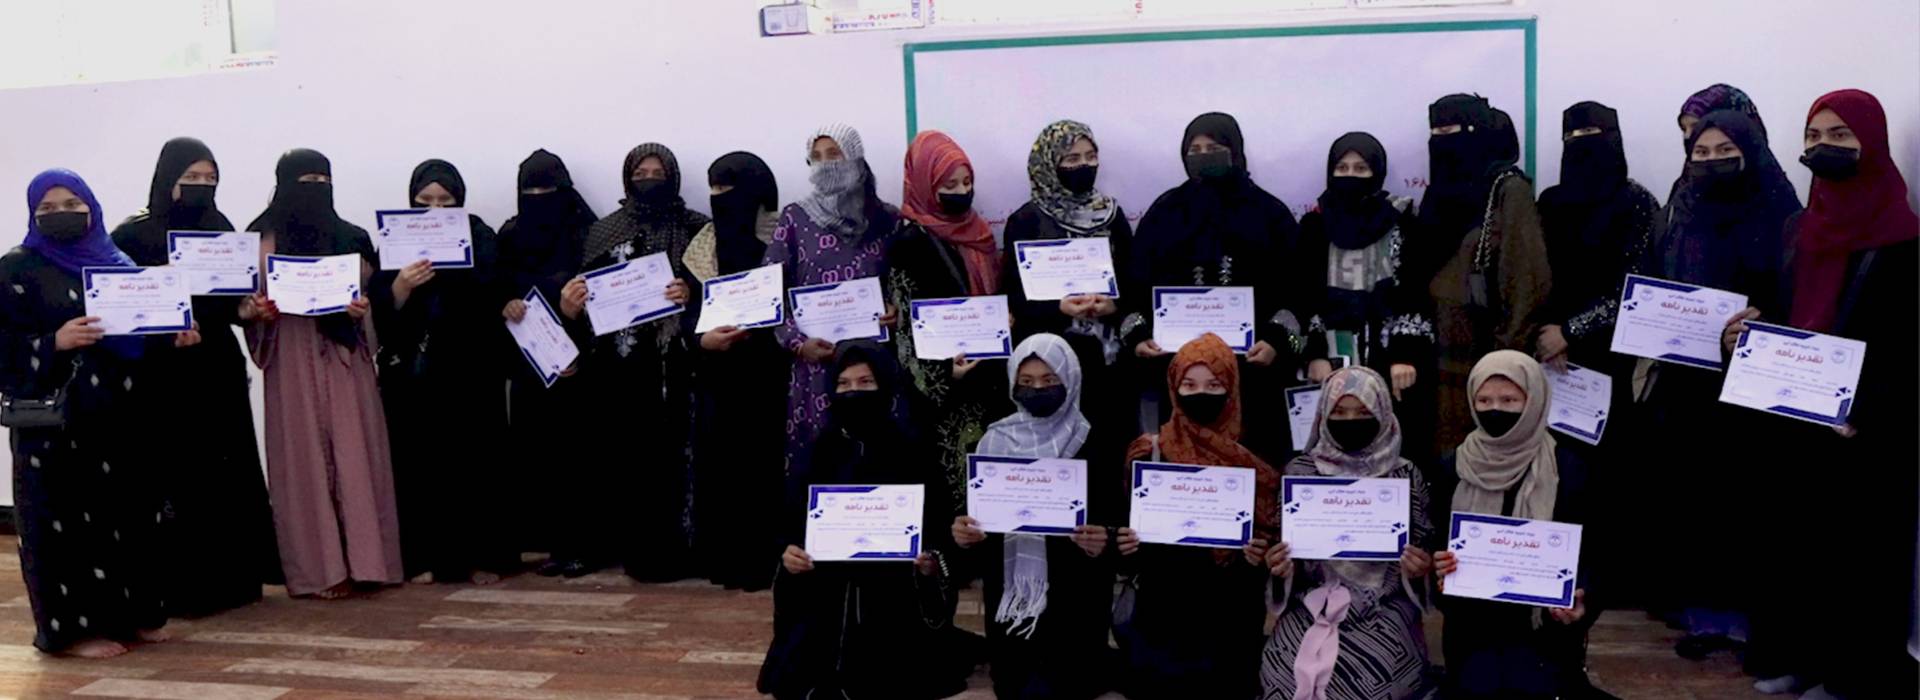 The Community Center (VECC) in Afghanistan had its first graduates!